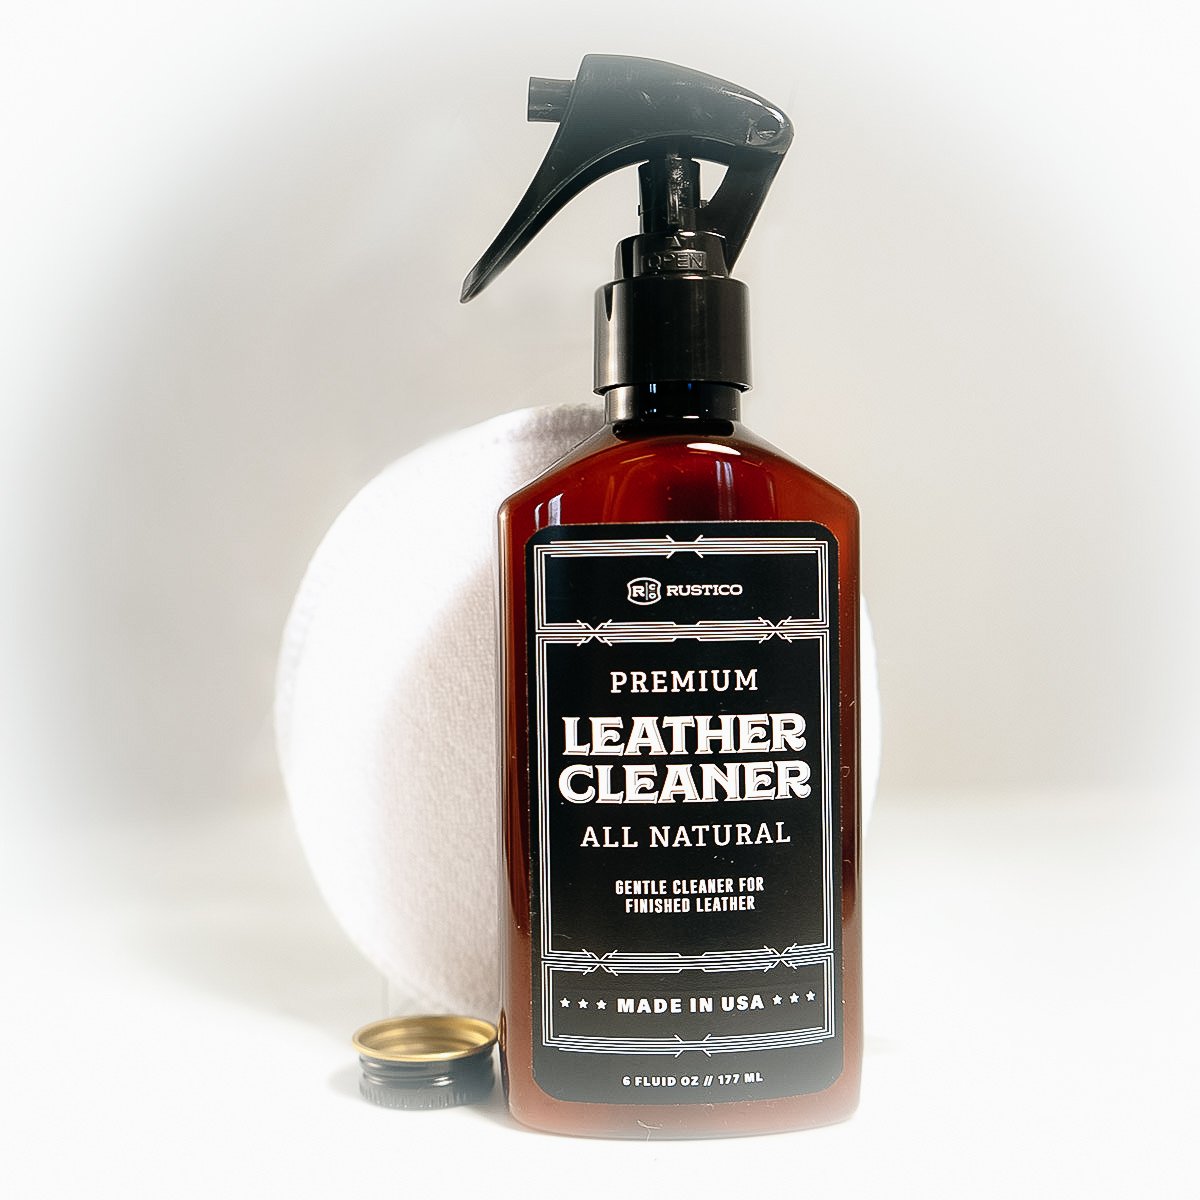 Rustico Leather Cleaner